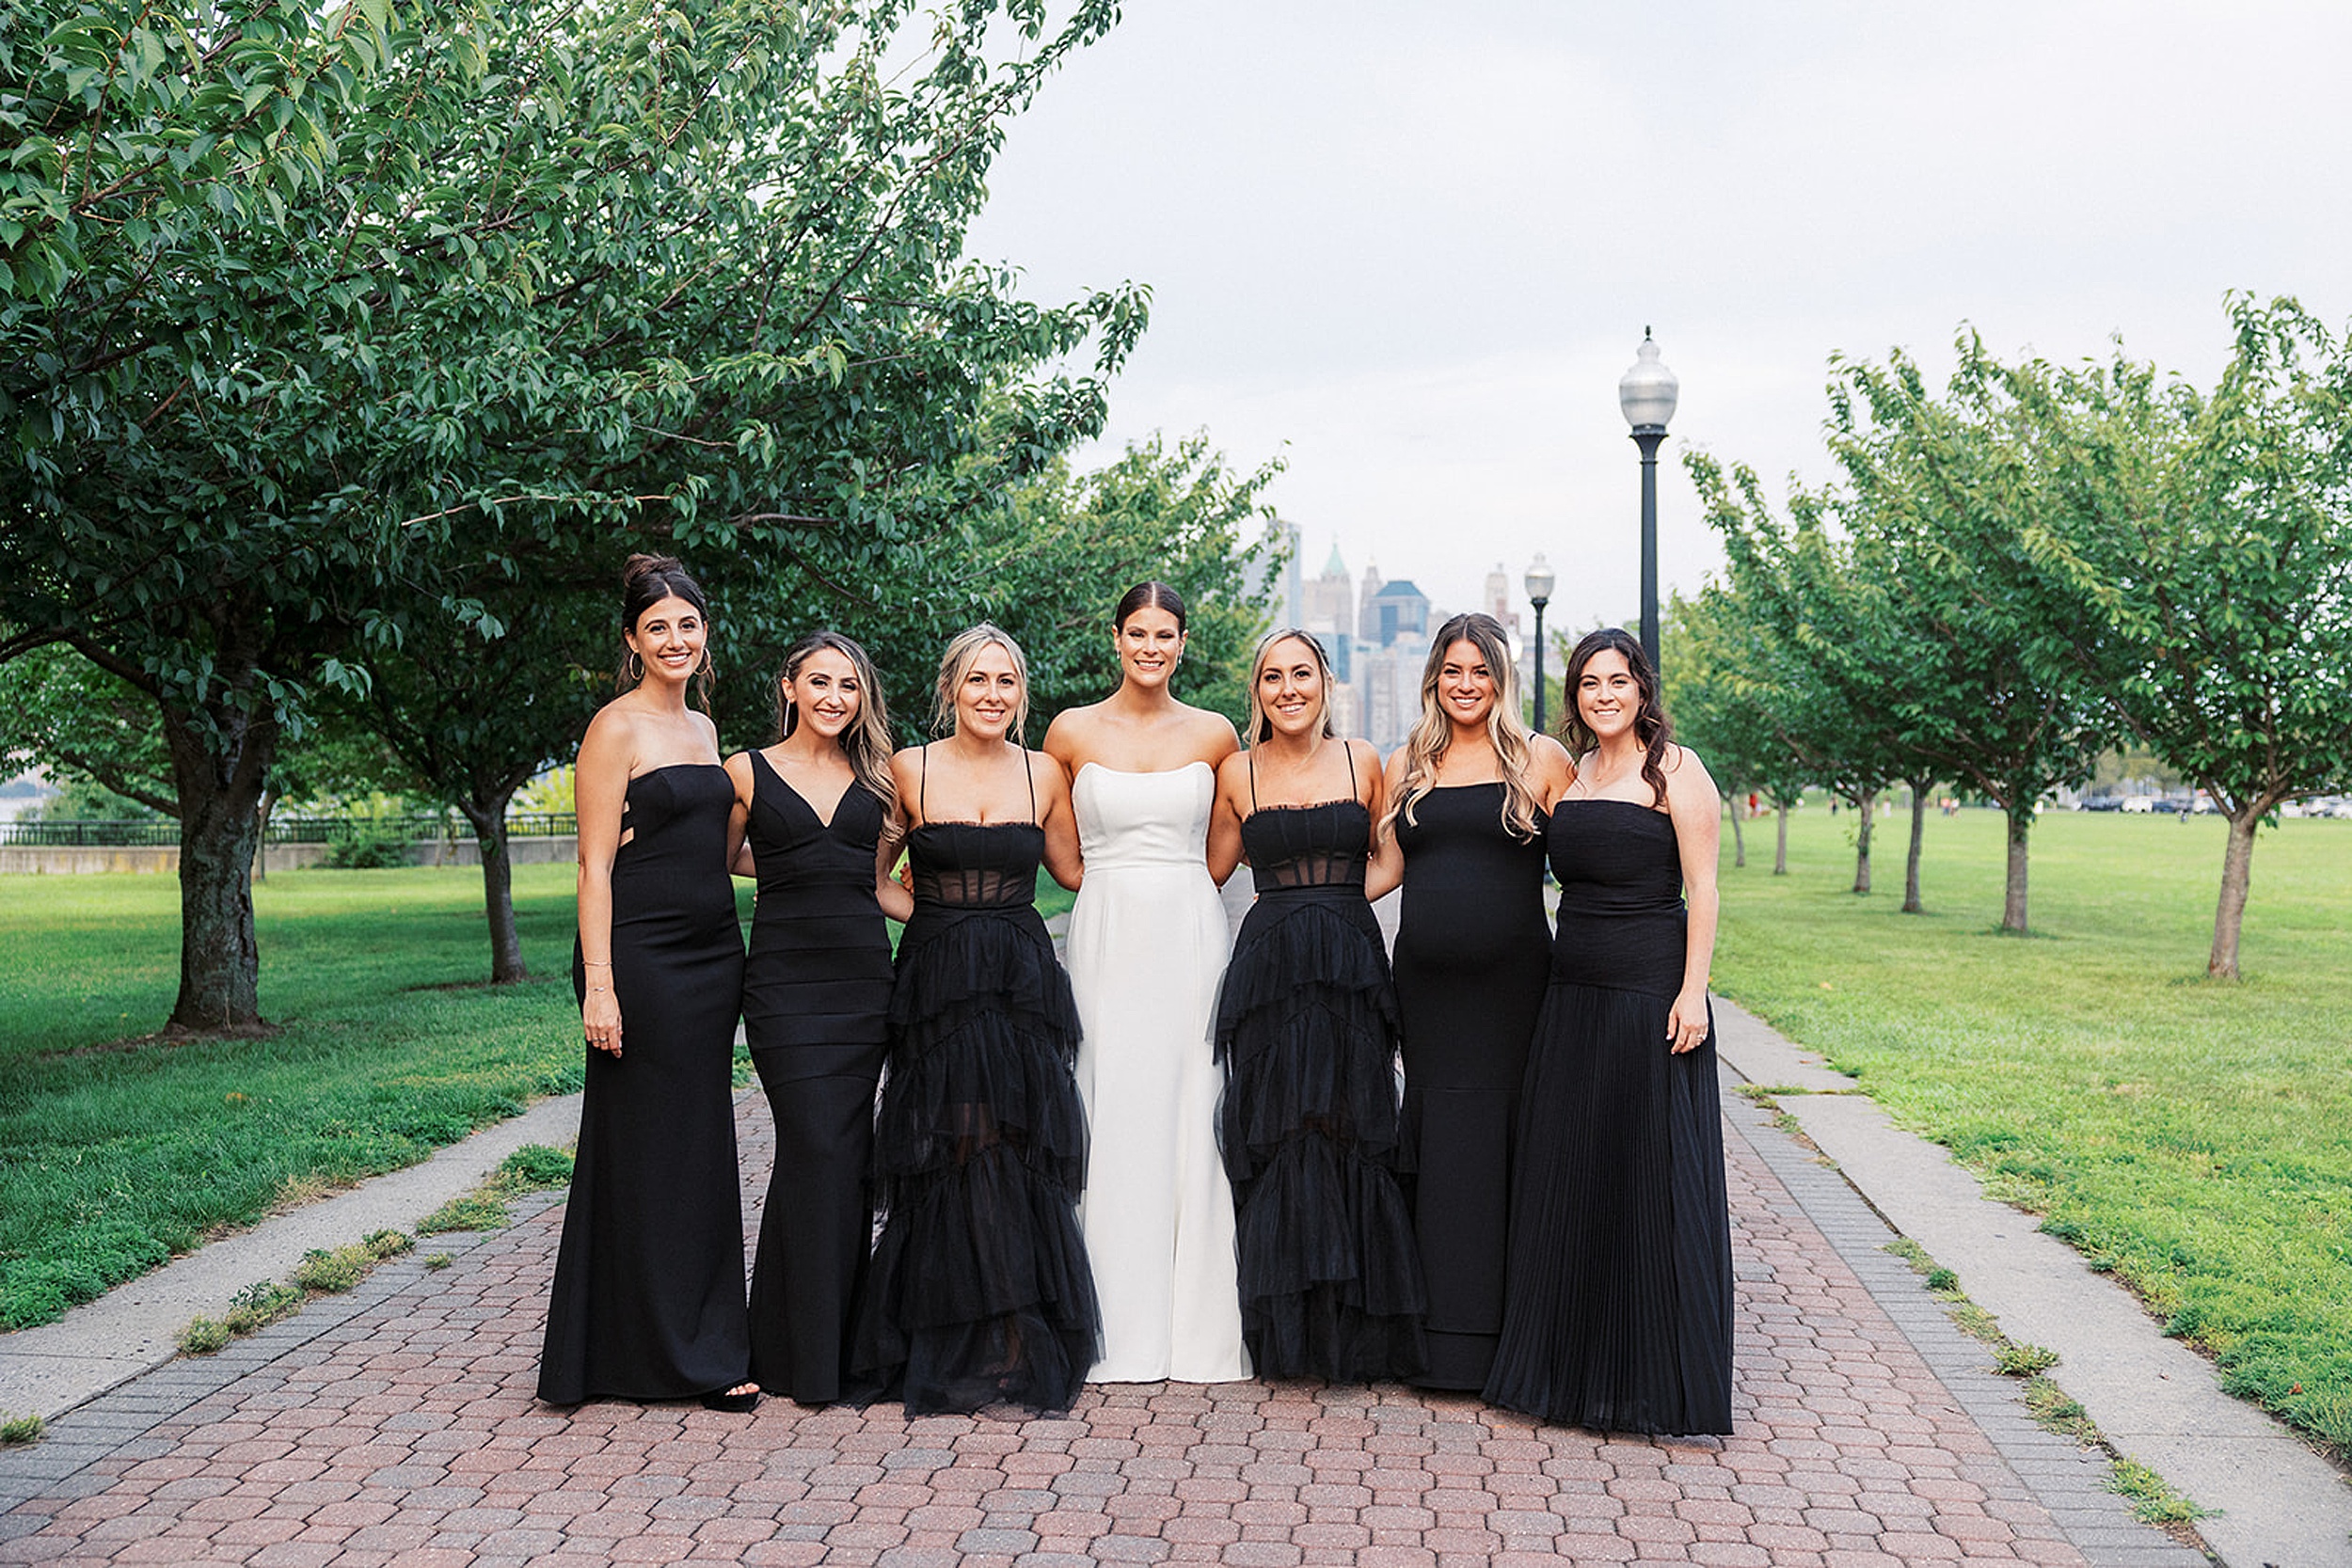 A bride stands with her six bridesmaids all in black dresses